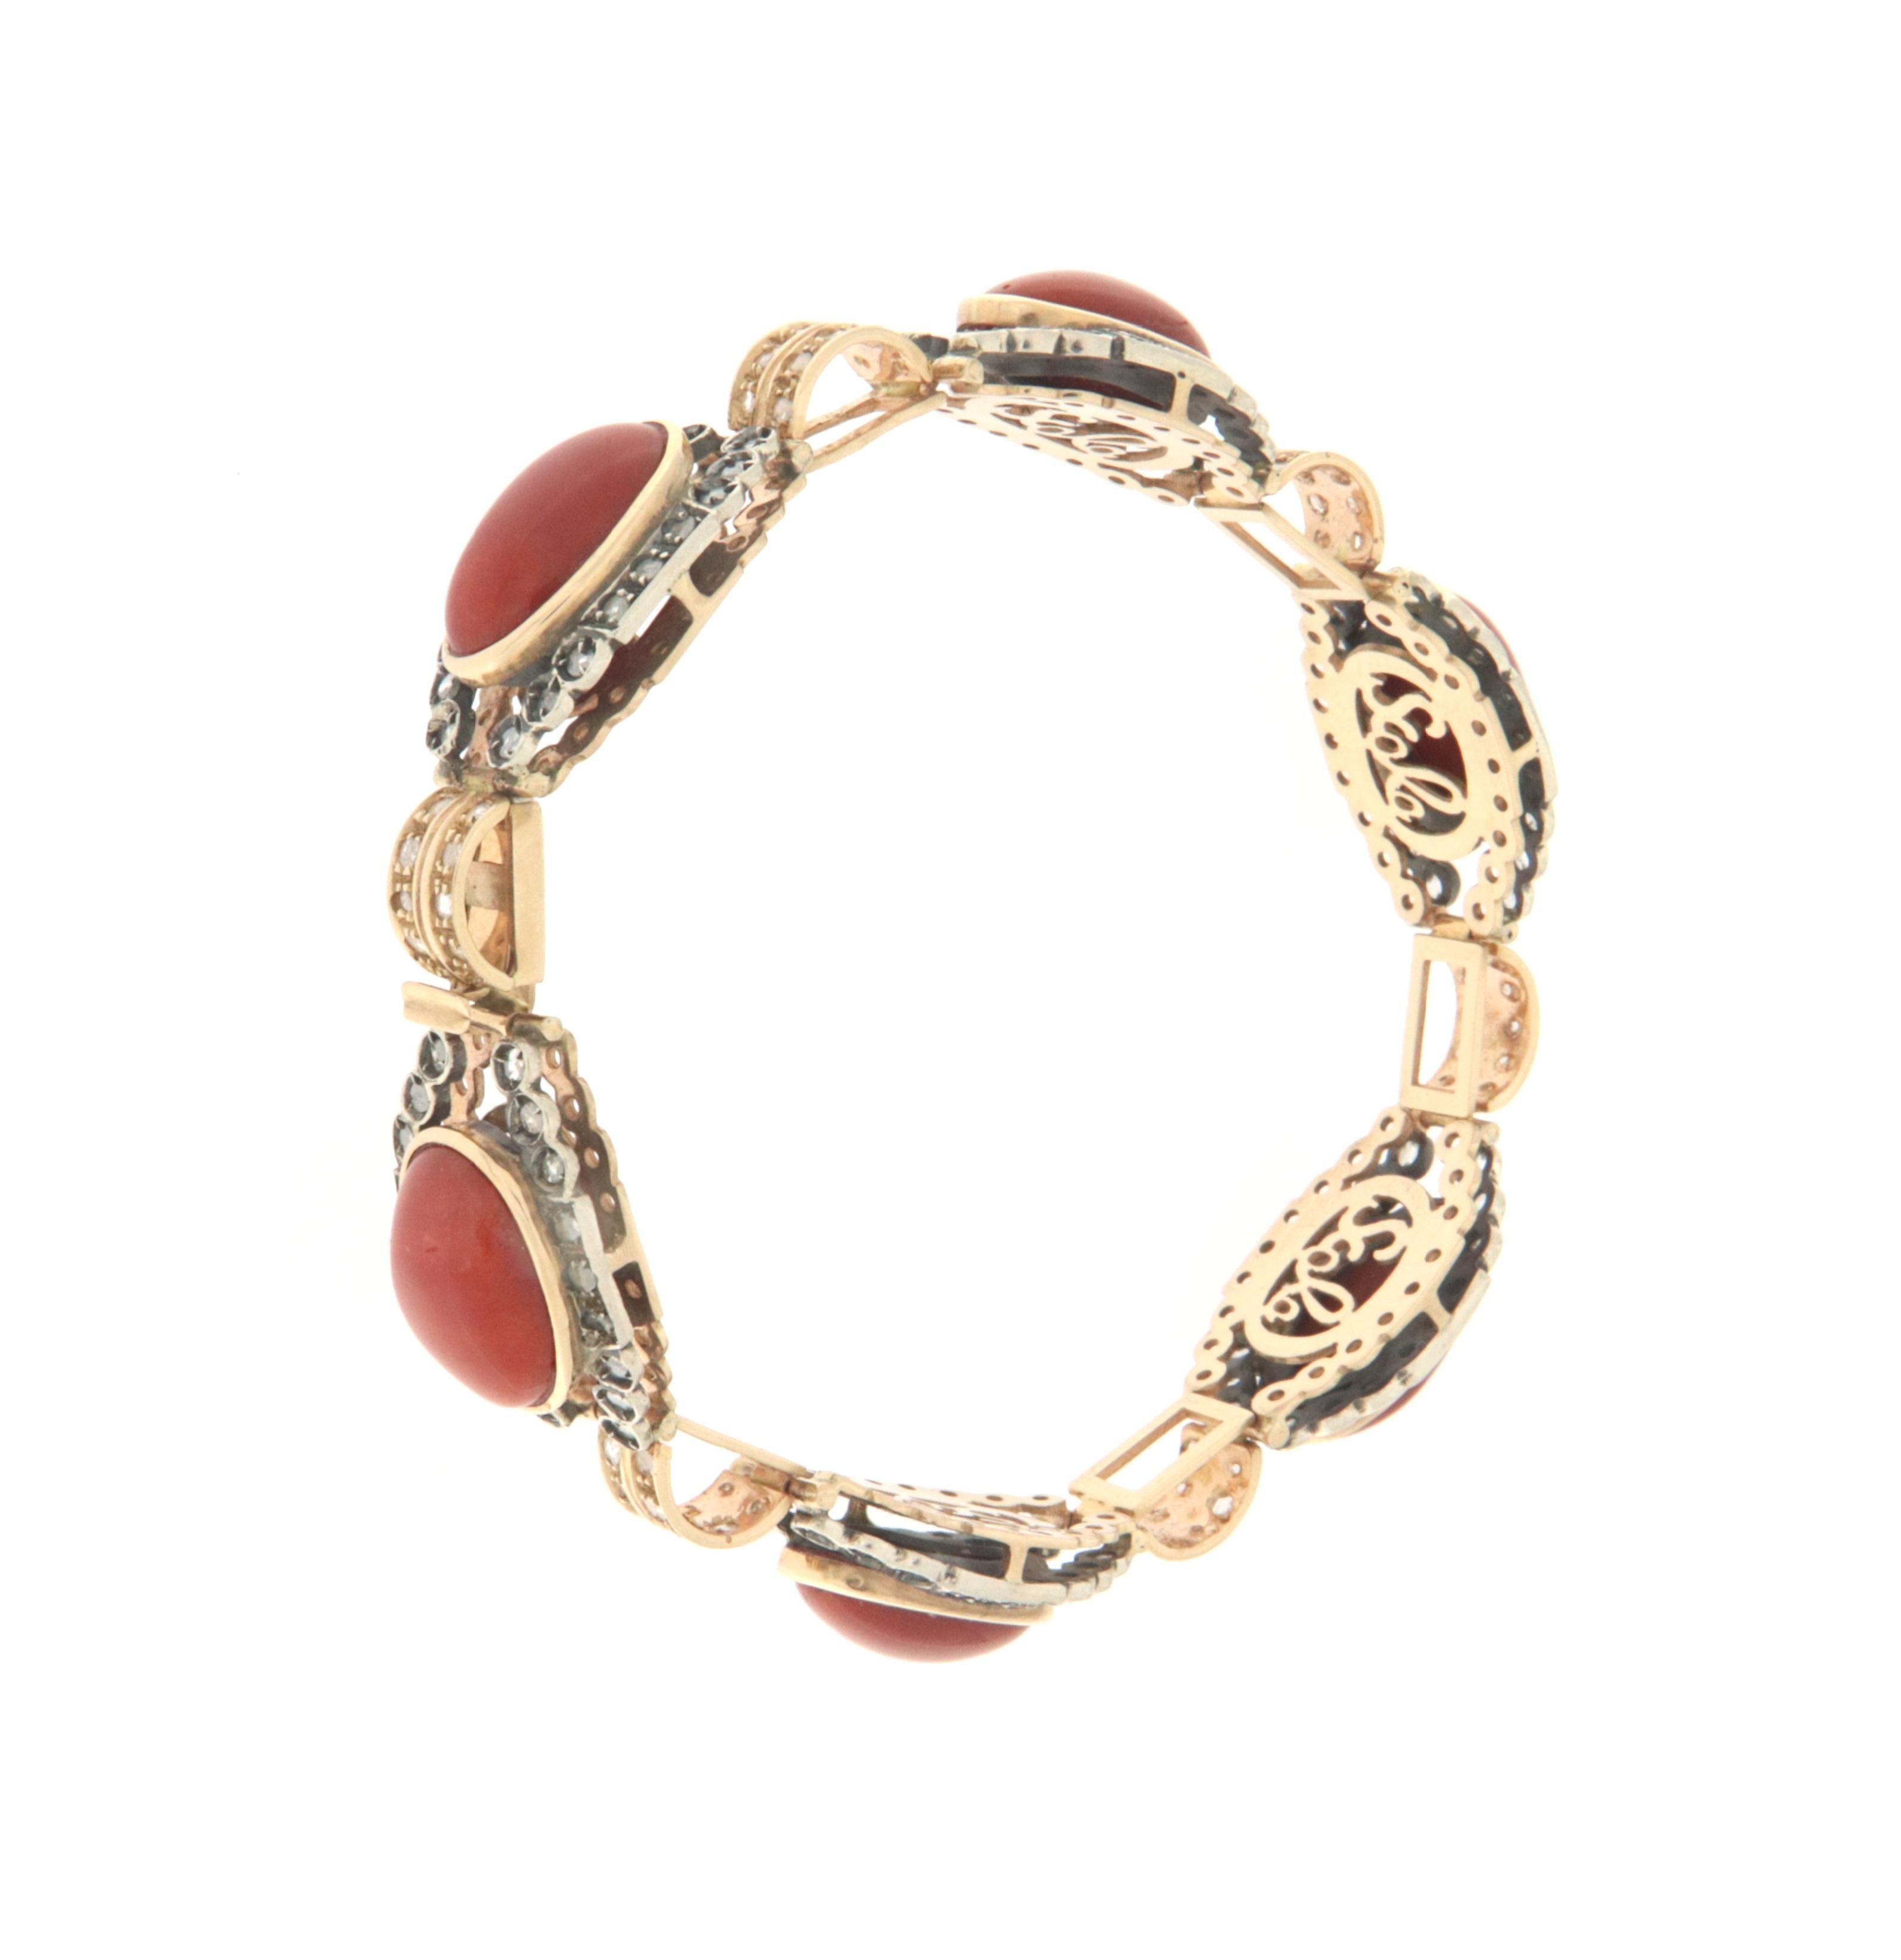 Bracelet 14 karat yellow gold and 800 silver thousandths  cuff bracelet.  Handmade by craftsmen assembled with natural coral and rose cut diamonds
 
Bracelet total weight 32.10 grams 
Diamonds weight 1.53 karat
Coral weight 6.30 grams
Size Bracelet